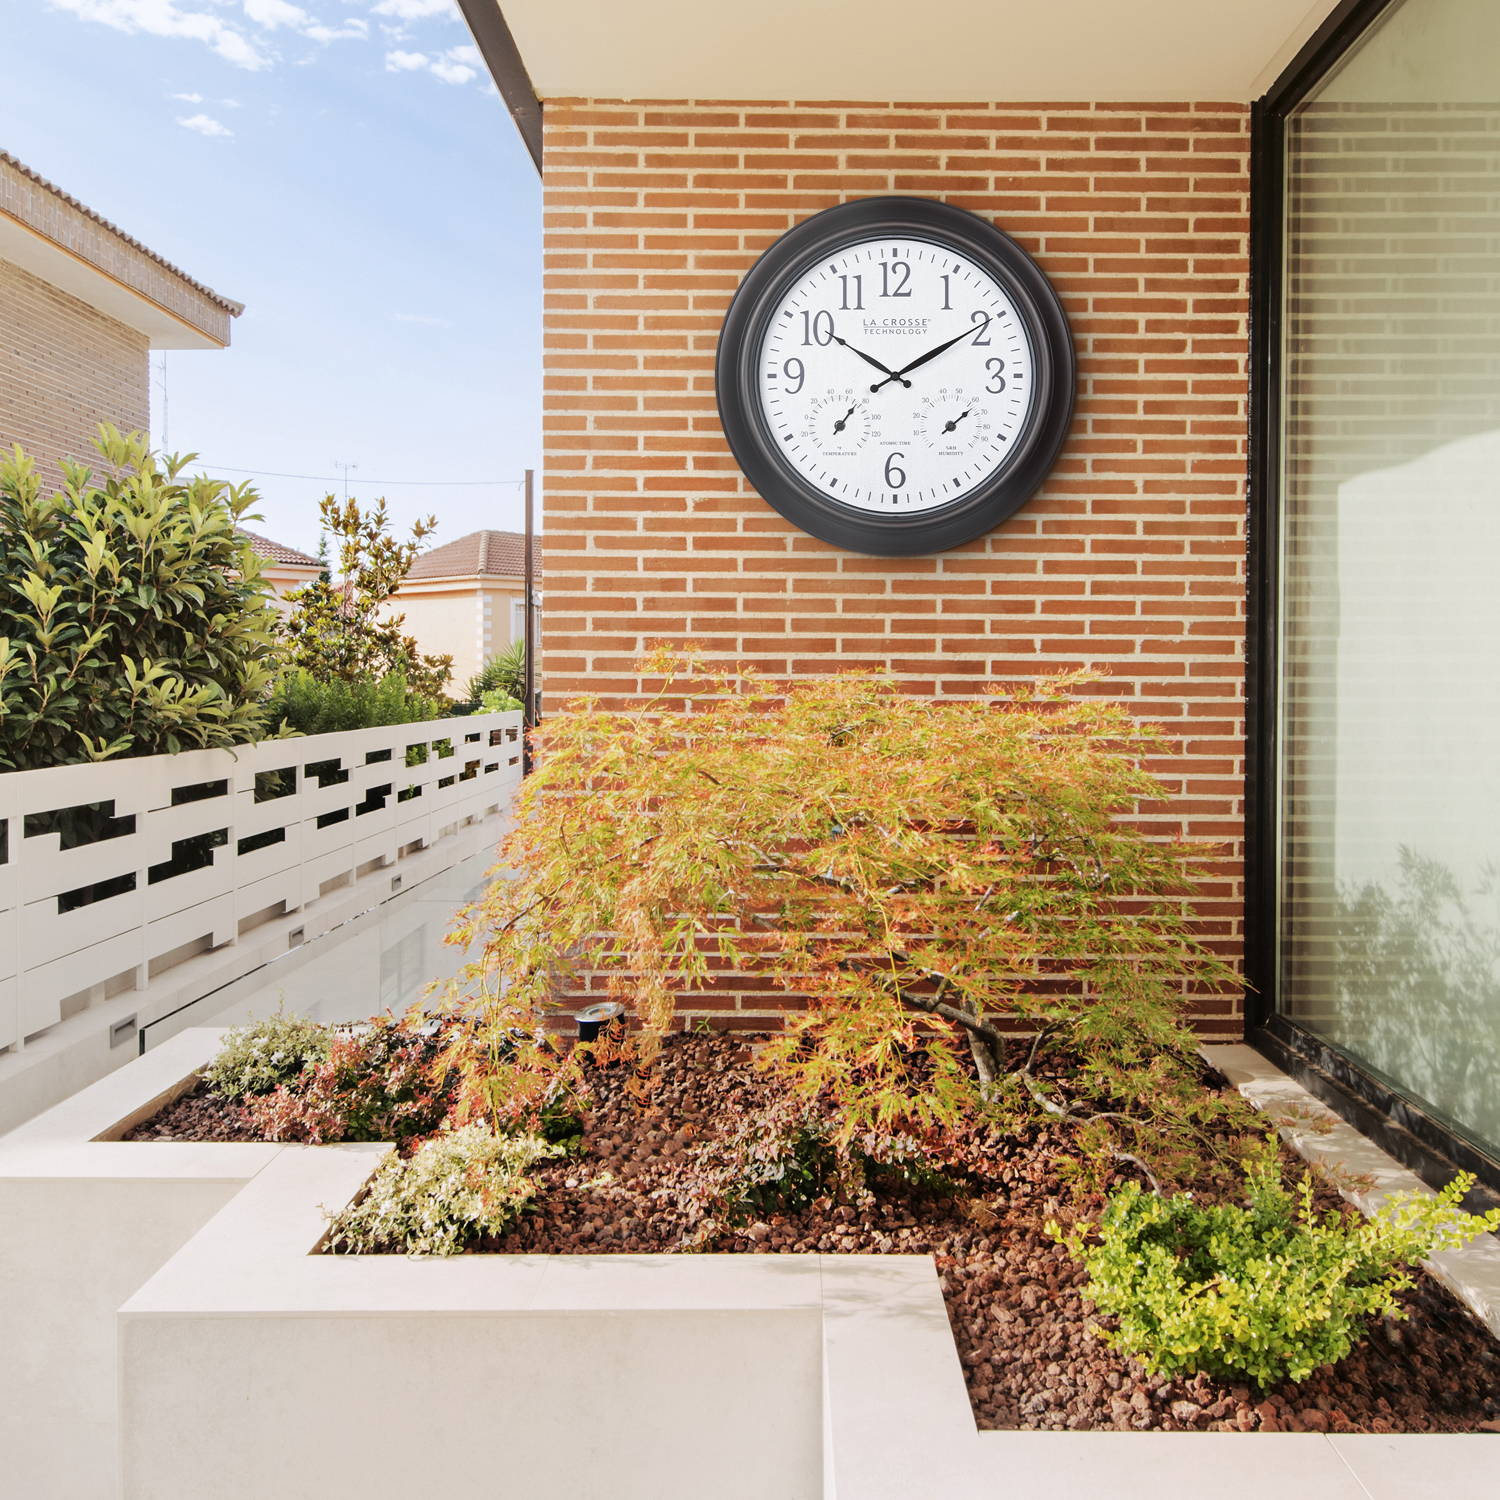 Indoor Outdoor Atomic Analog Wall Clock with Temperature and Humidity